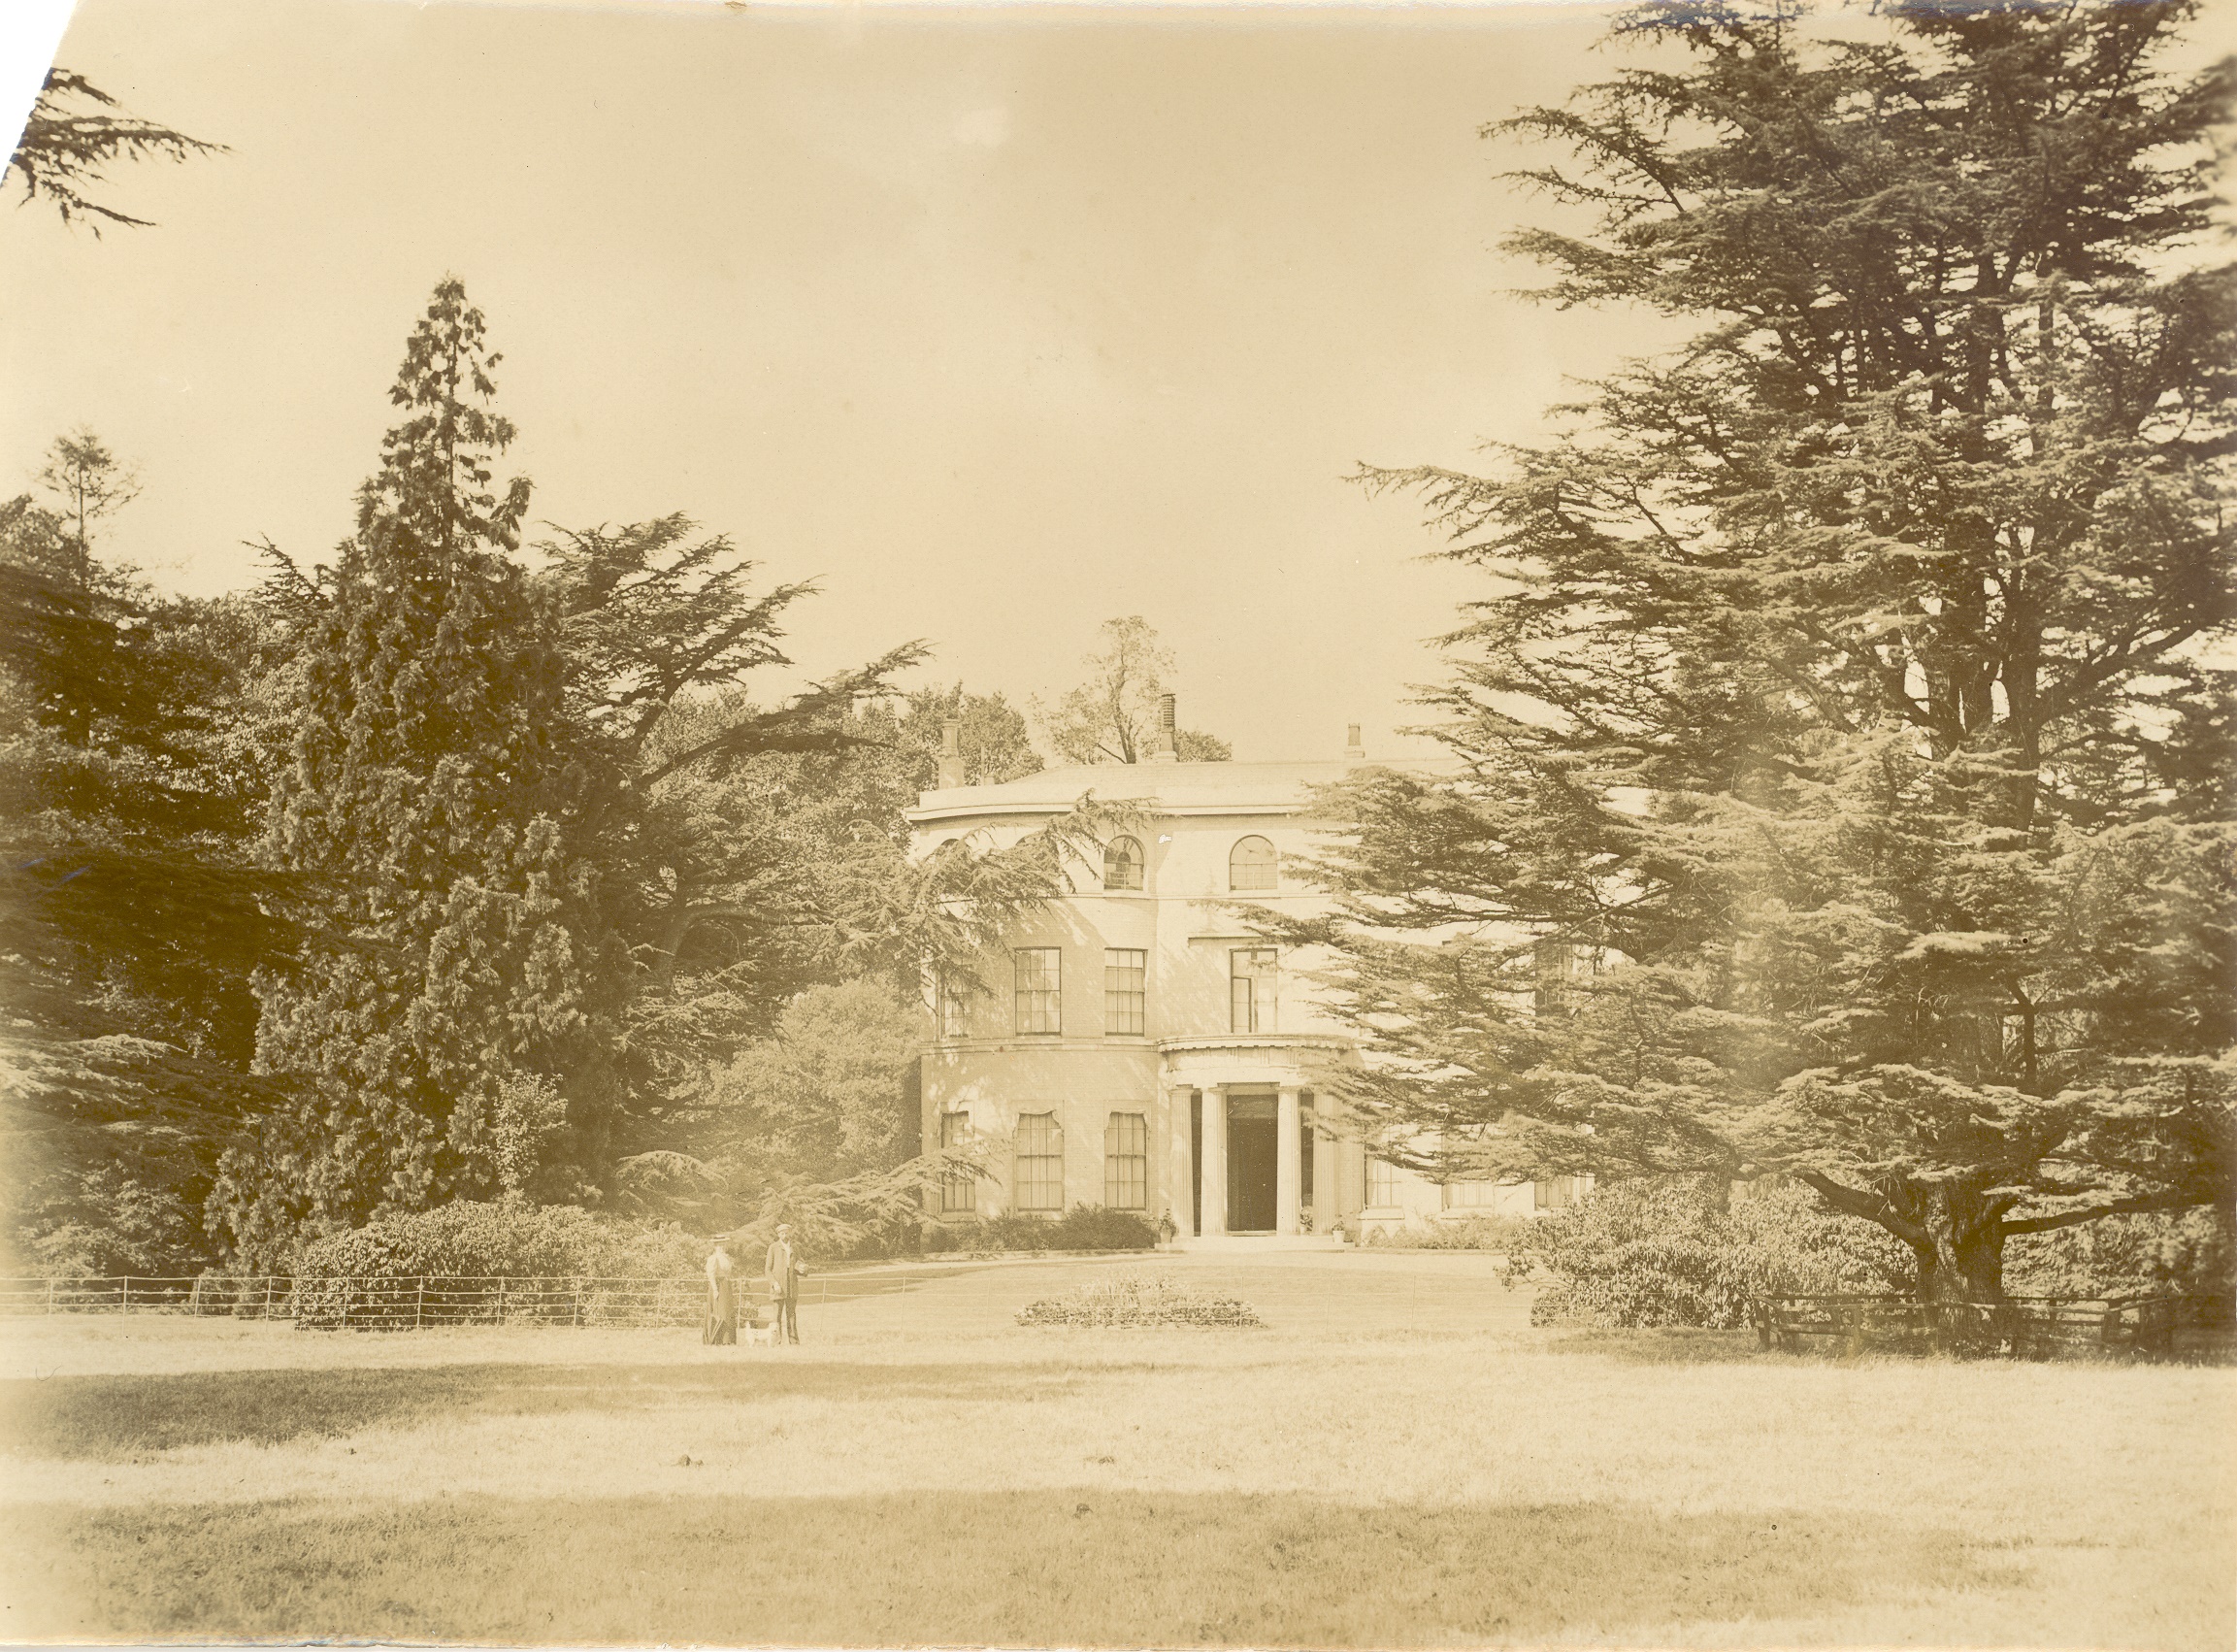 A photograph of Apps Court and the surrounding estate in 1894, just 3 years before Fanny Gill moved out of the property and 4 years before it was sold the the Southward and Vauxhall Water Company, who demolished it.